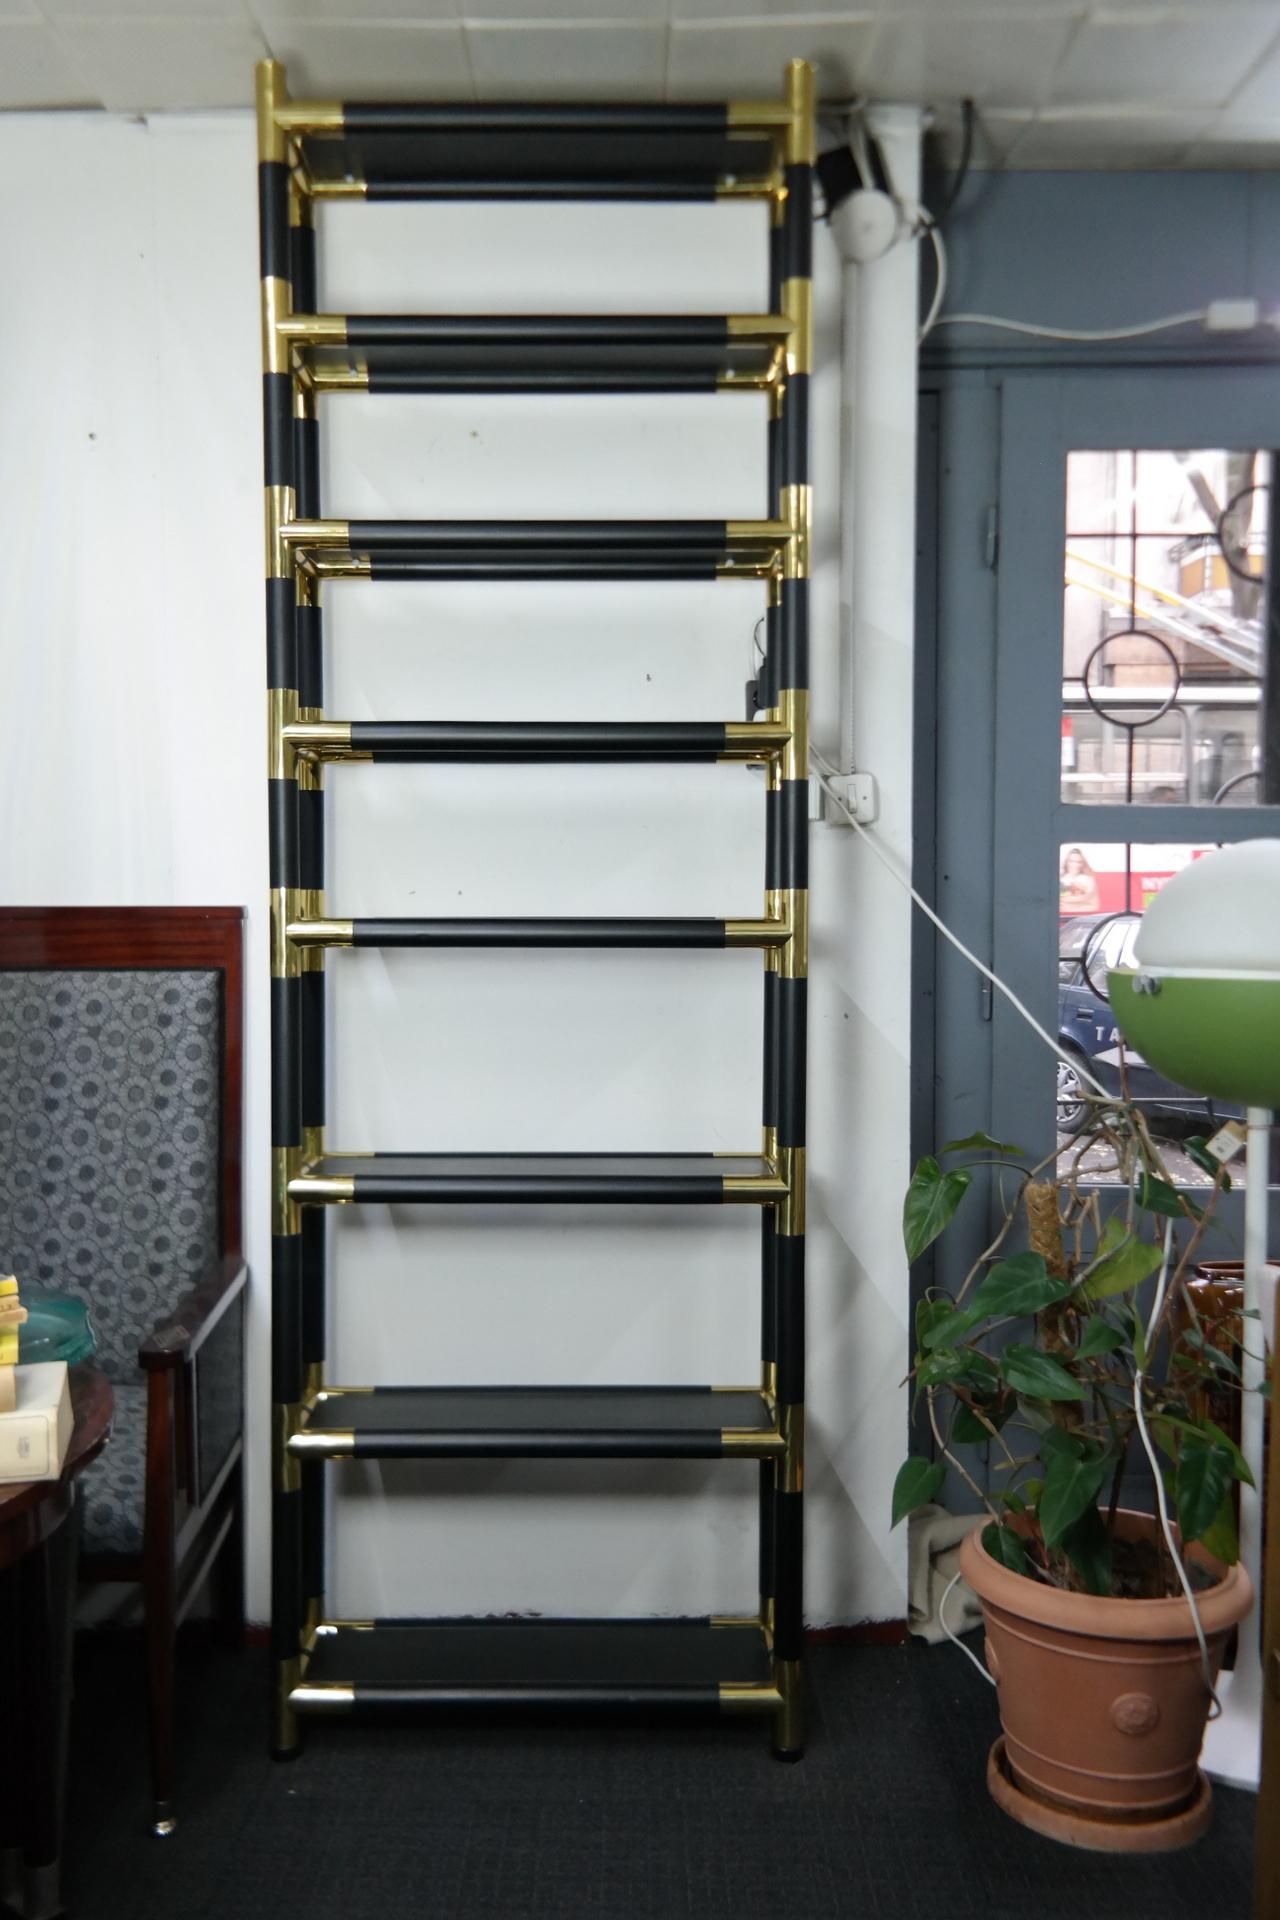 This tall bookshelf features wooden shelves and massive brass joints. It's a rare Mid-Century Modern piece from the 1970s.
  